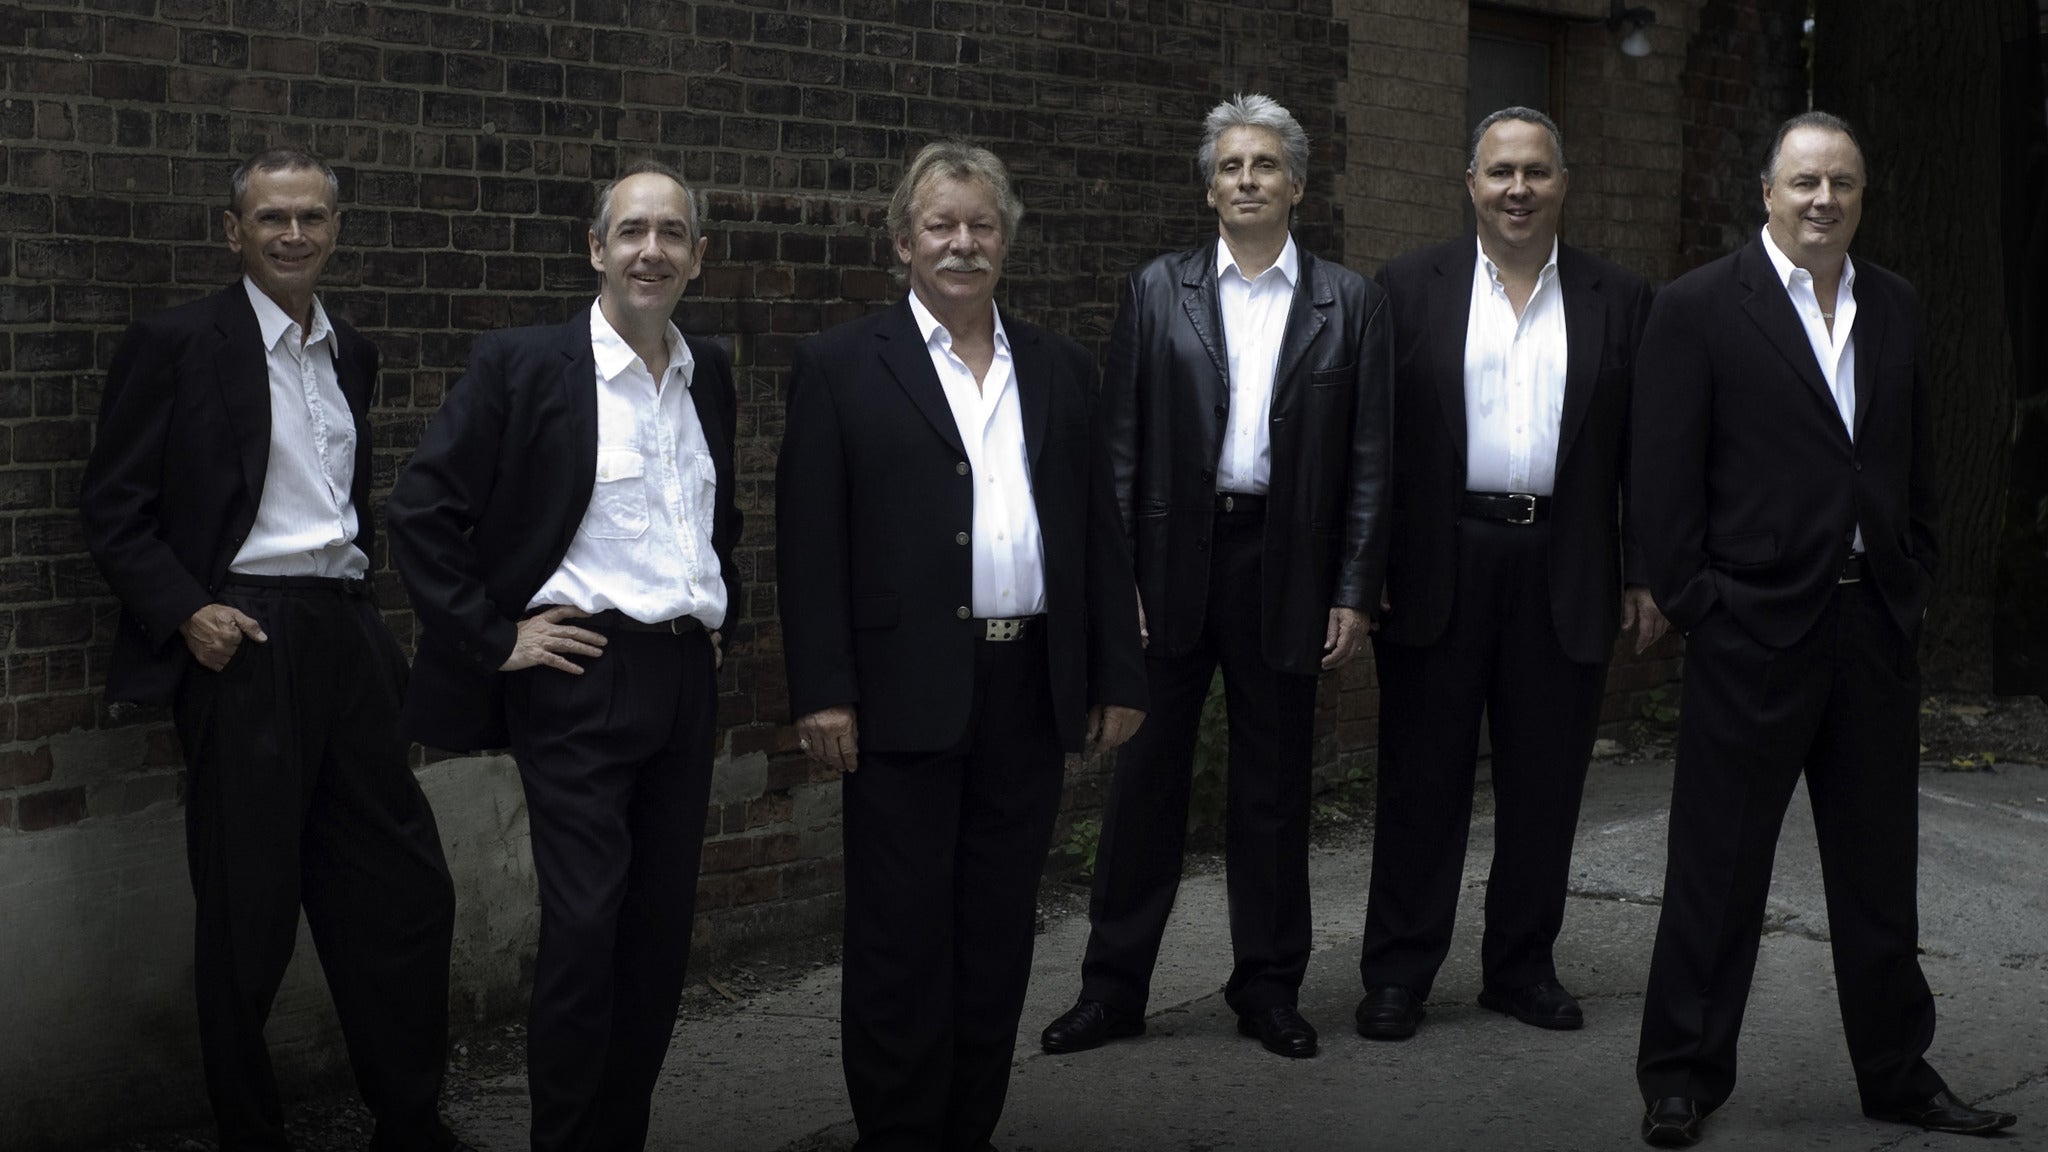 Downchild Blues Band Wallpapers